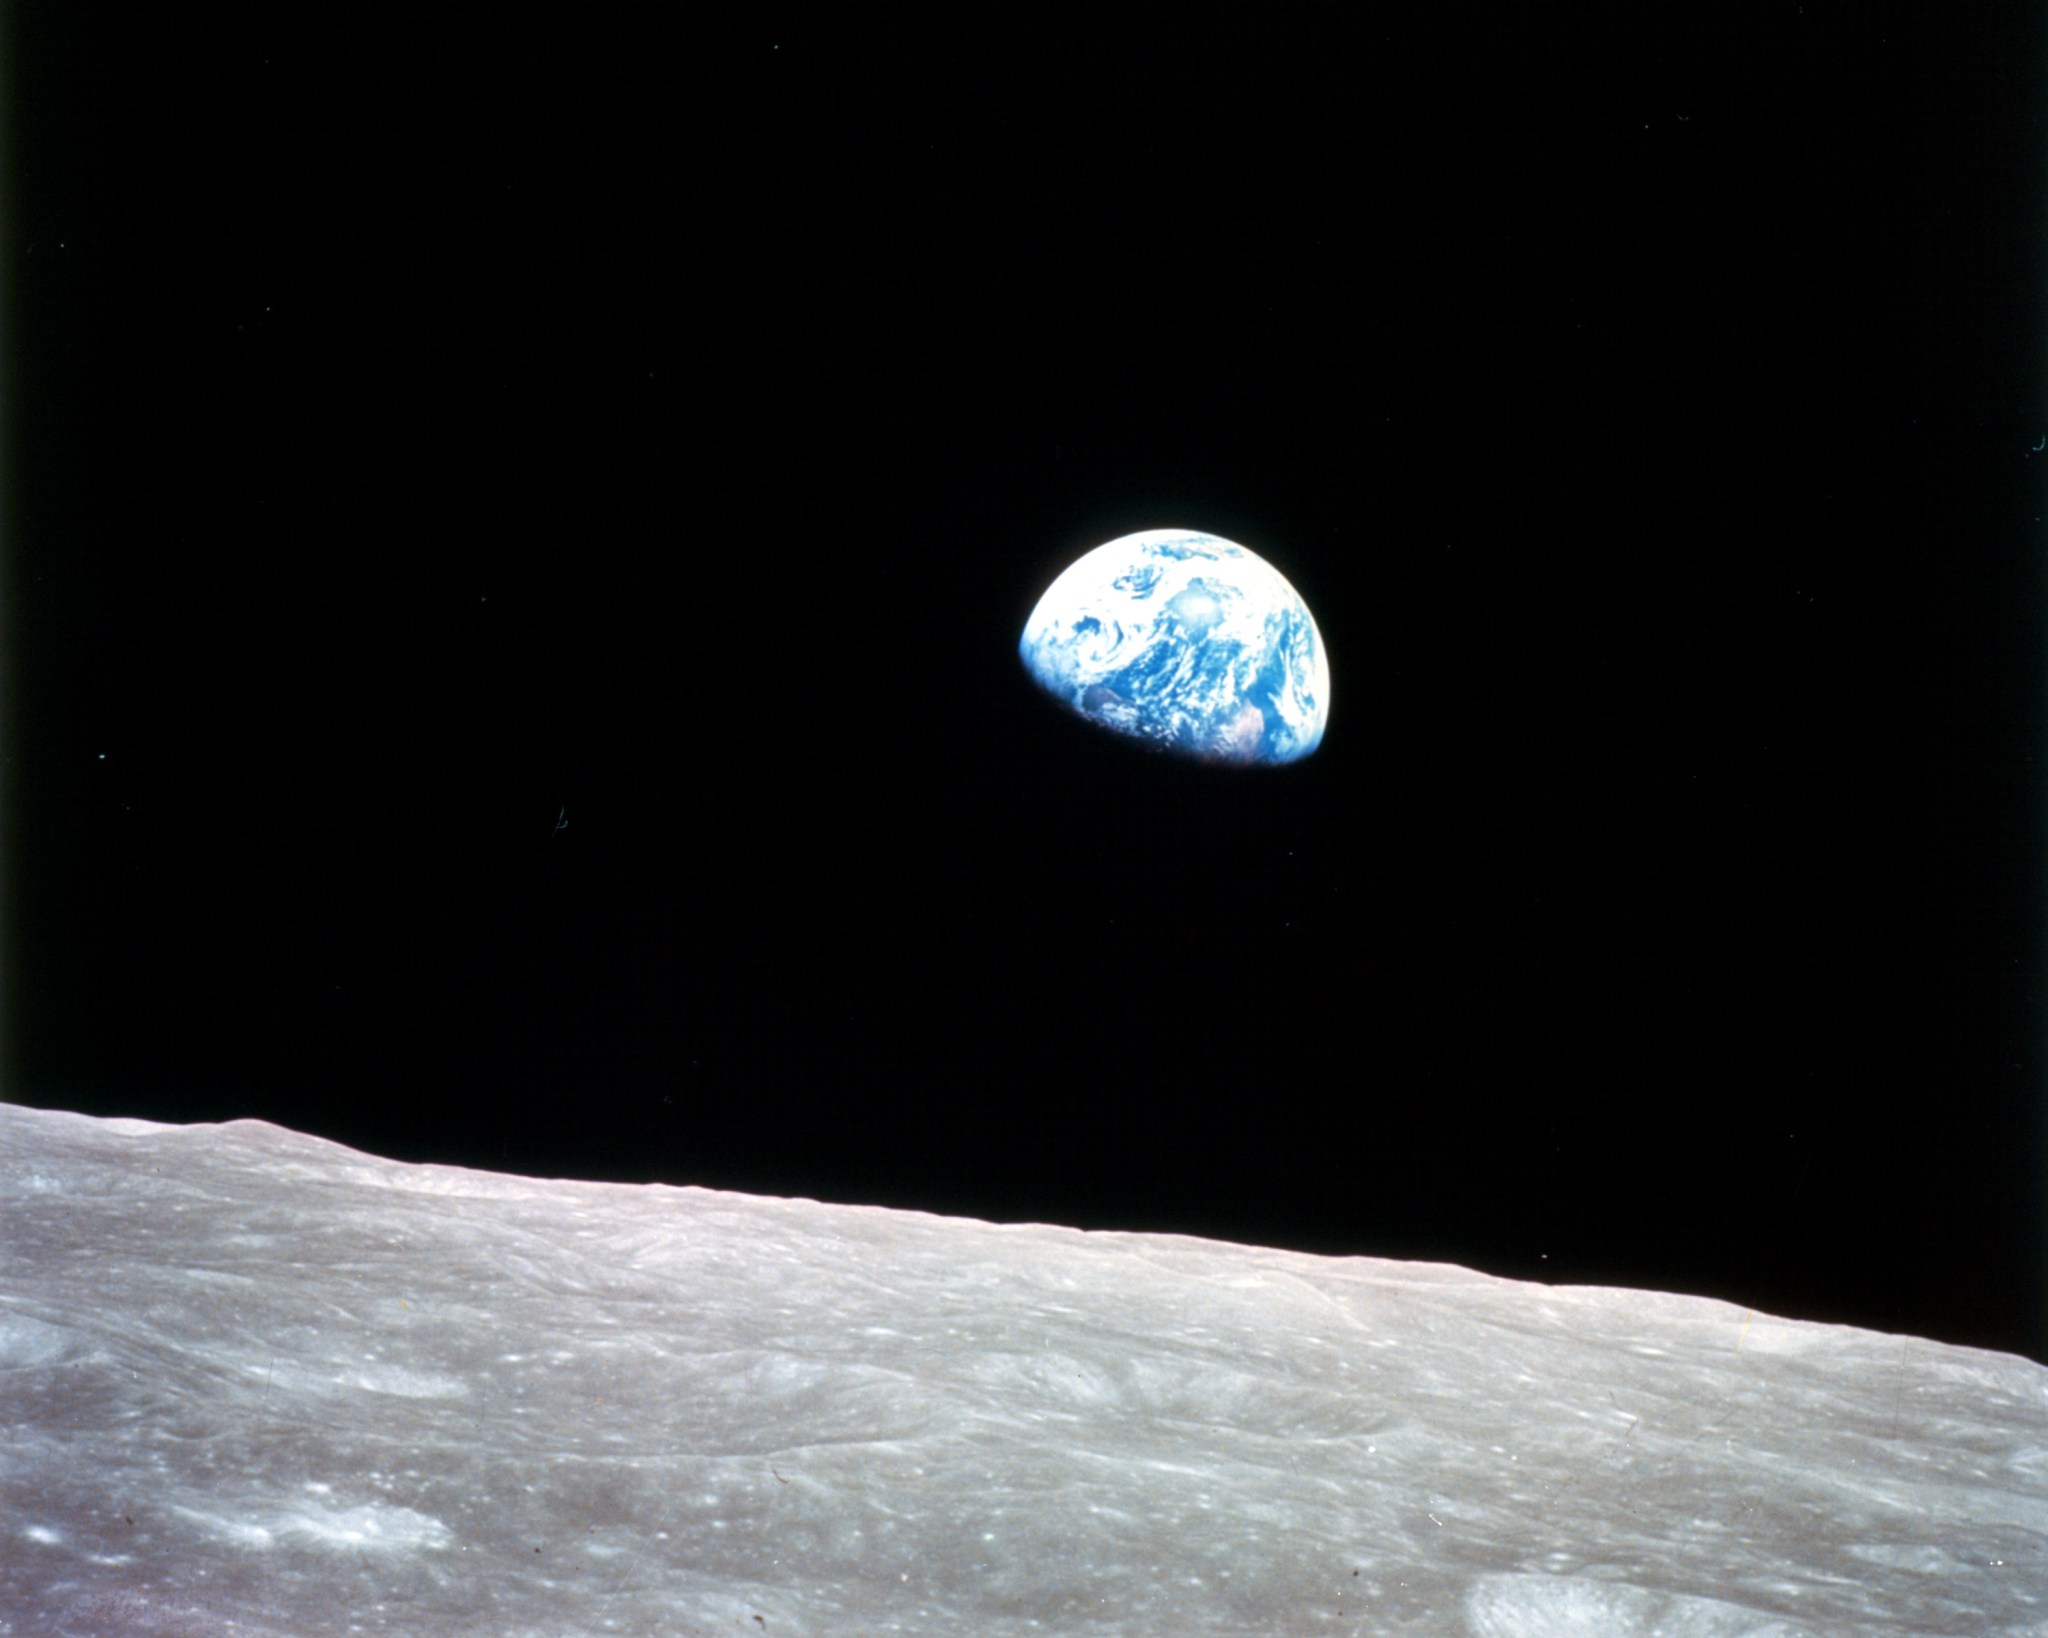 Moon surface with Earth in the distance.